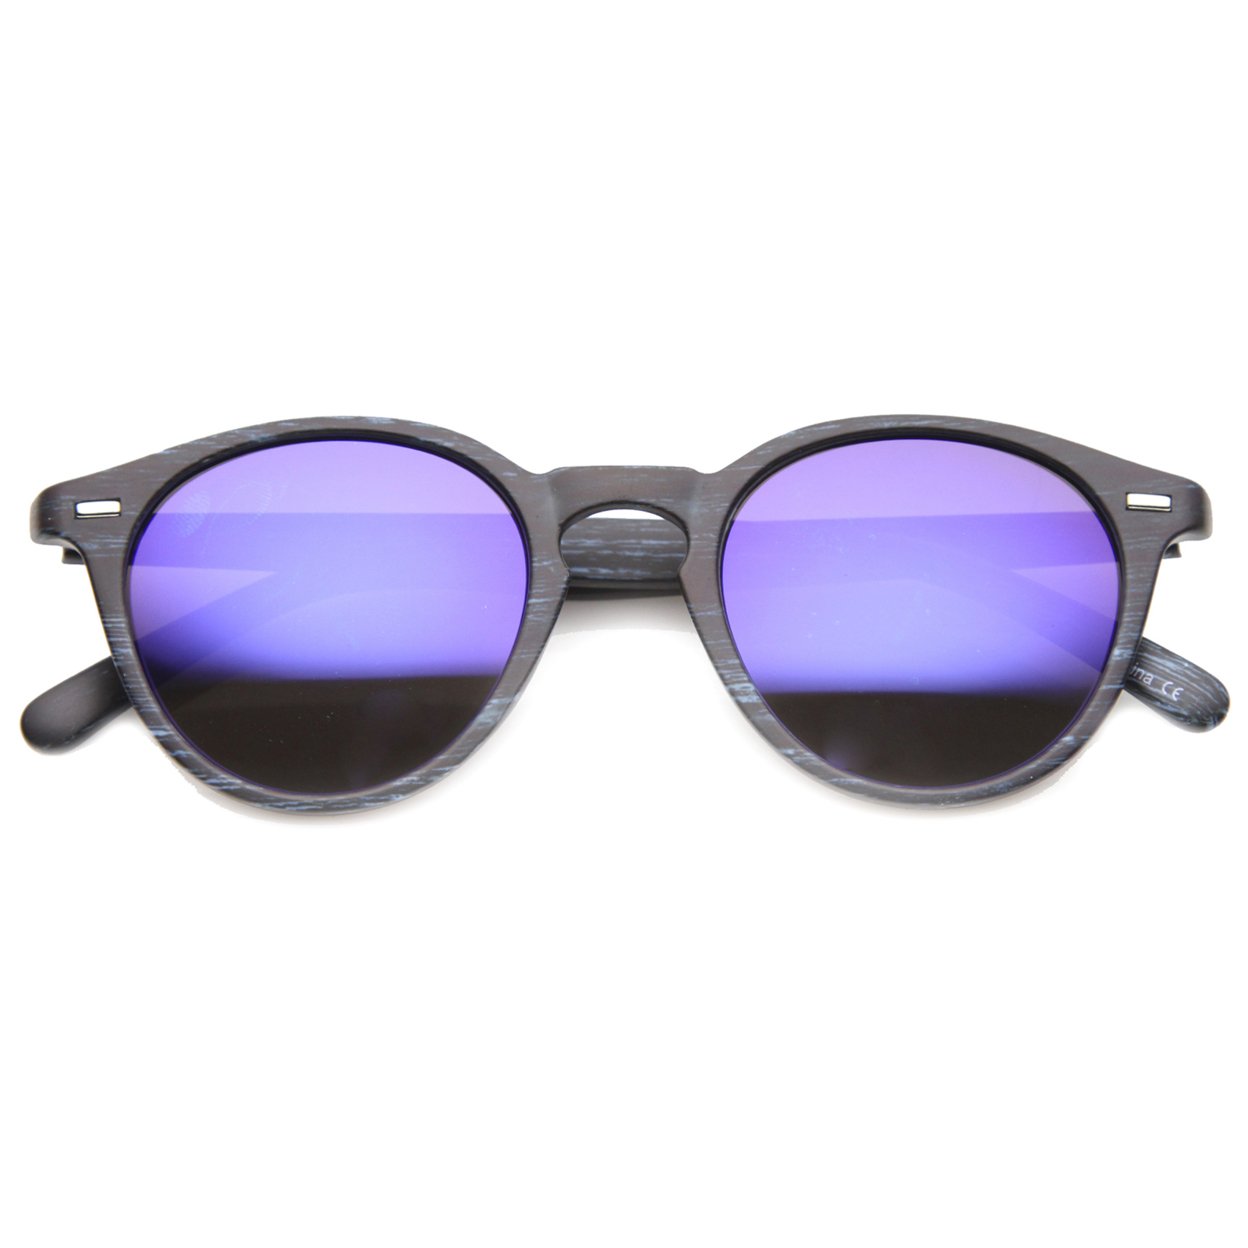 Mens Horn Rimmed Sunglasses With UV400 Protected Mirrored Lens 9812 - Black-White-Wood / Violet